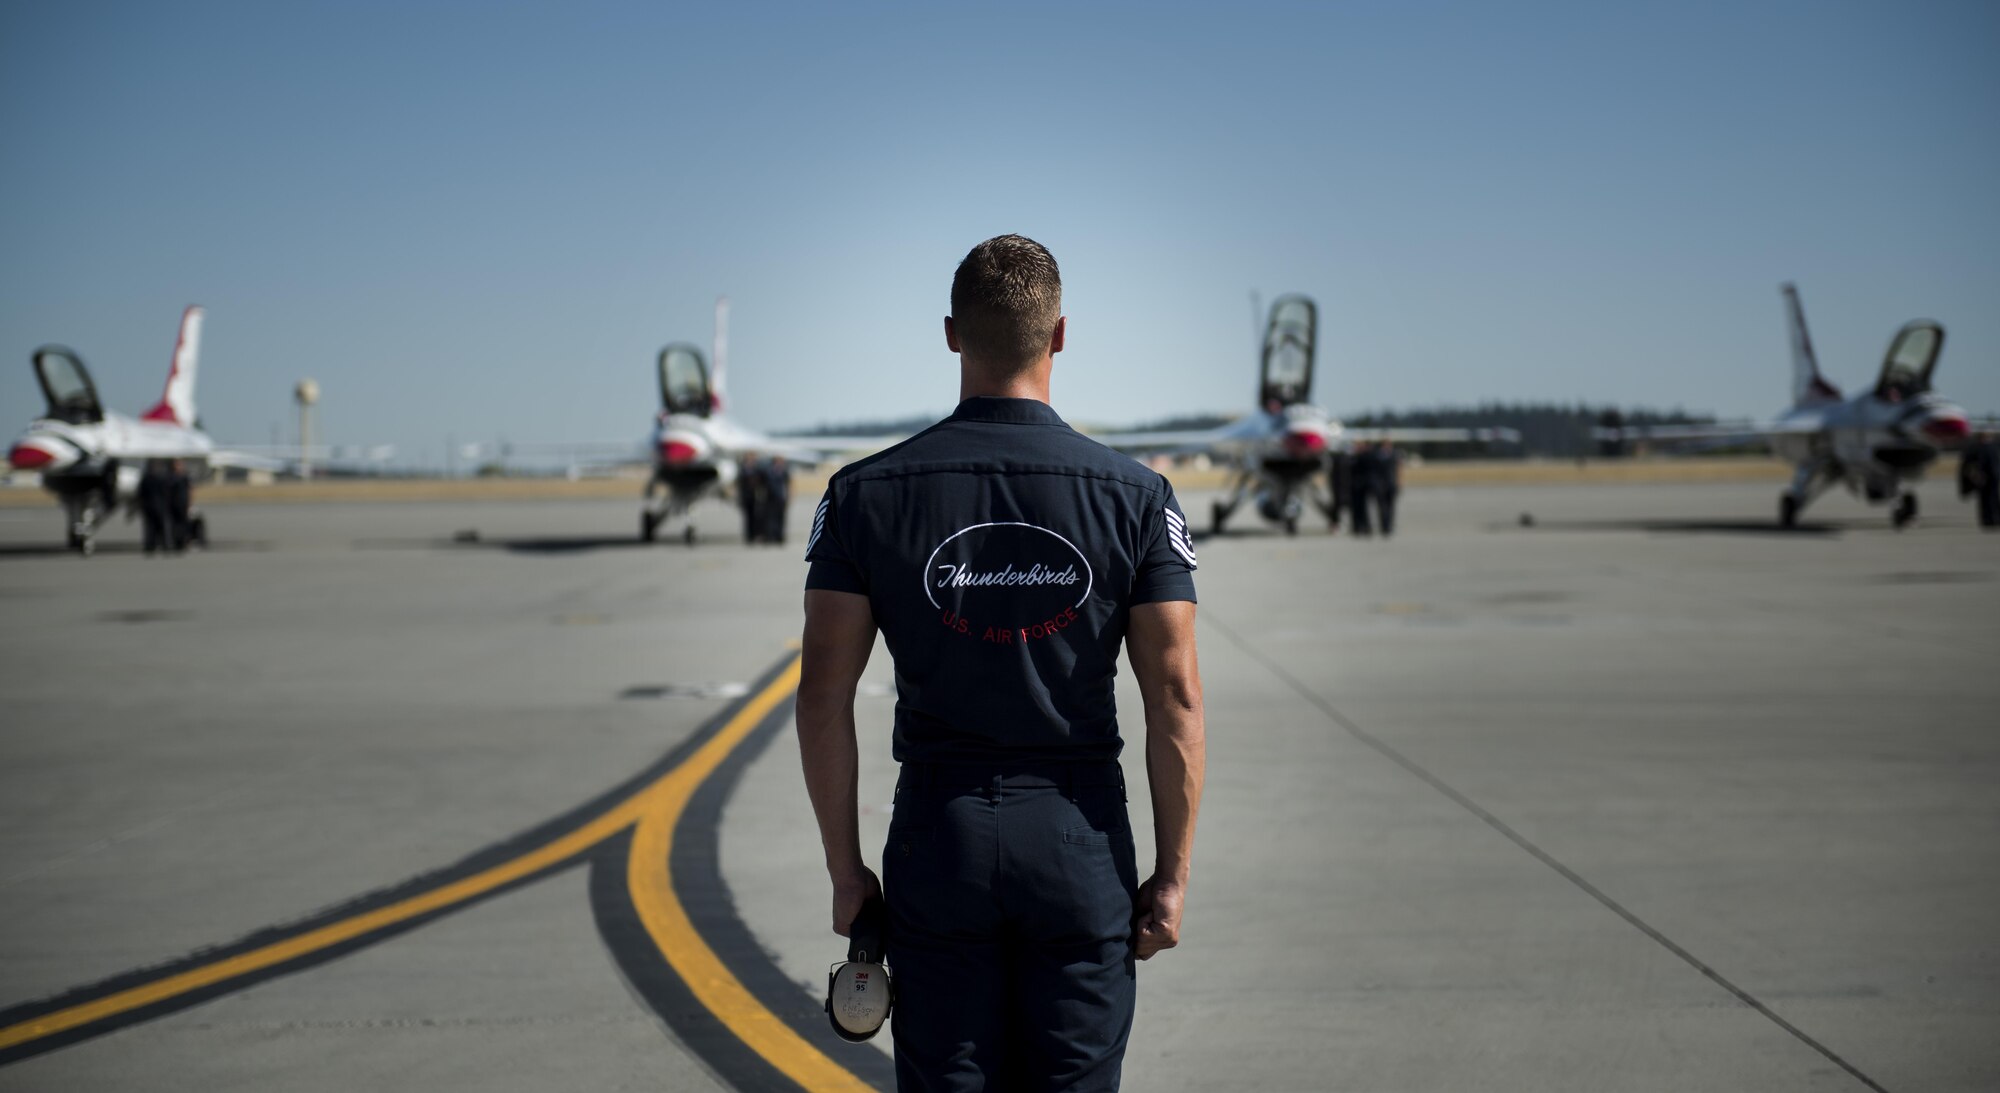 A U.S. Air Force Aerial Demonstration Squadron Thunderbird maintainer looks out as other Thunderbirds finish their performances at Skyfest 2017 Air Show and Open House July 30, 2017, at Fairchild Air Force Base, Washington. The Thunderbirds are the Air Force’s premiere aerial demonstration team who perform at various military bases and civilian air shows around the world. (U.S. Air Force photo/ Senior Airman Sean Campbell) 